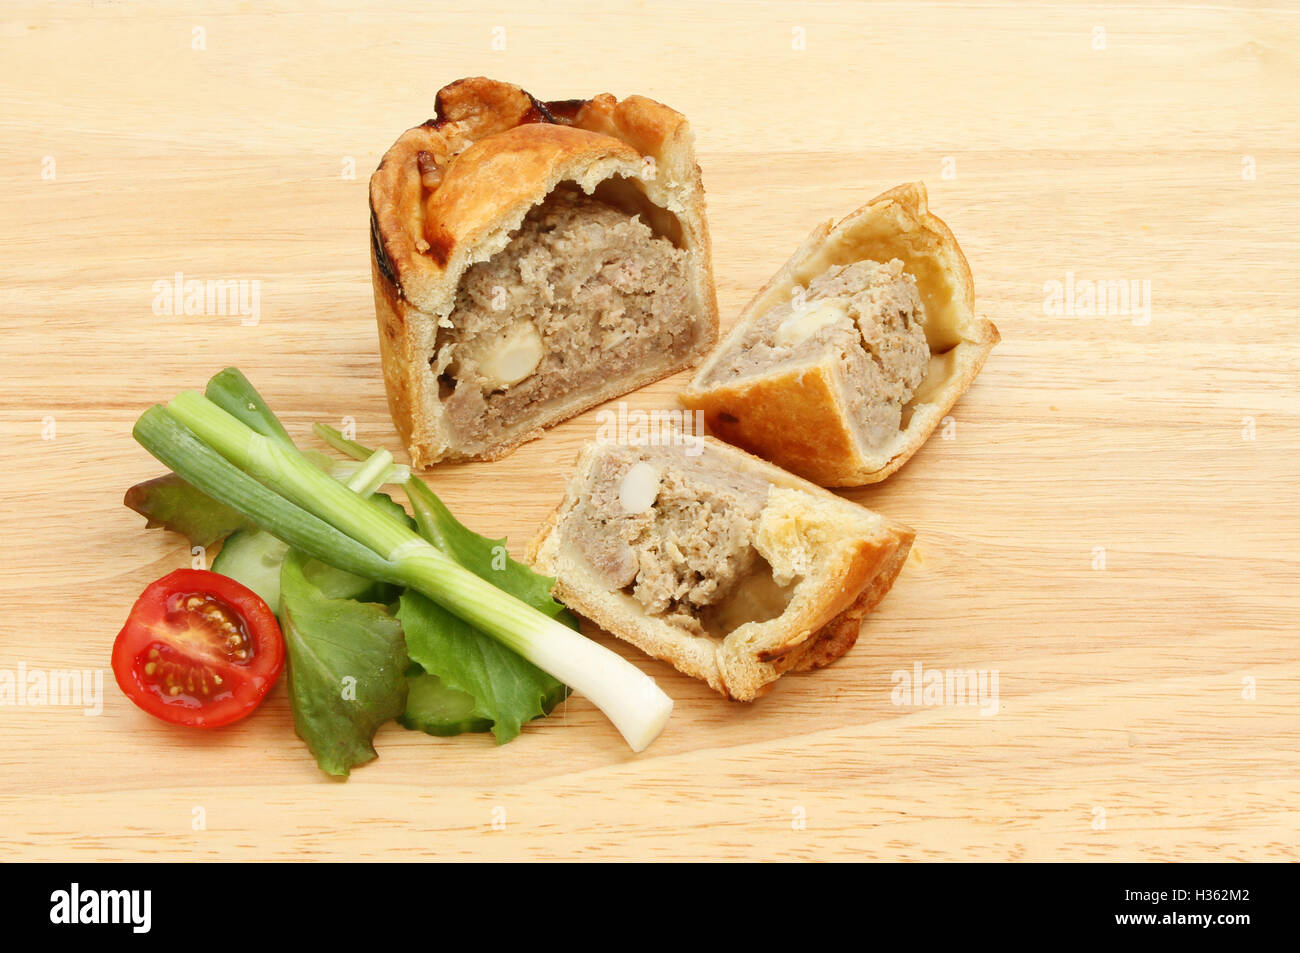 Pork pie and salad on a wooden chopping board Stock Photo